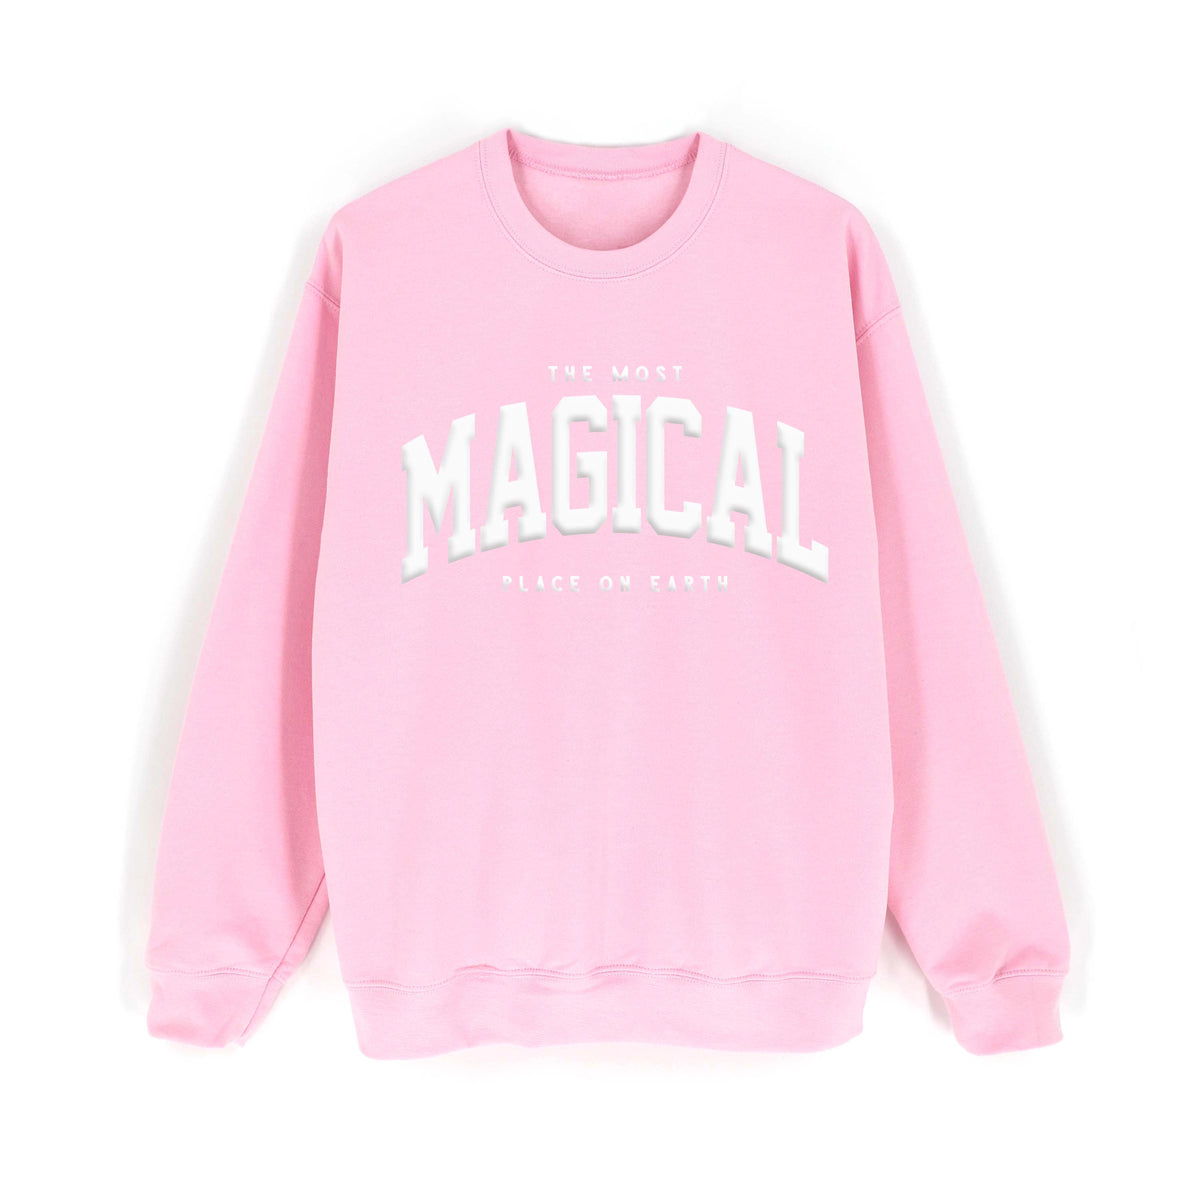 *RTS, The Most Magical Place on Earth Varsity Sweatshirt